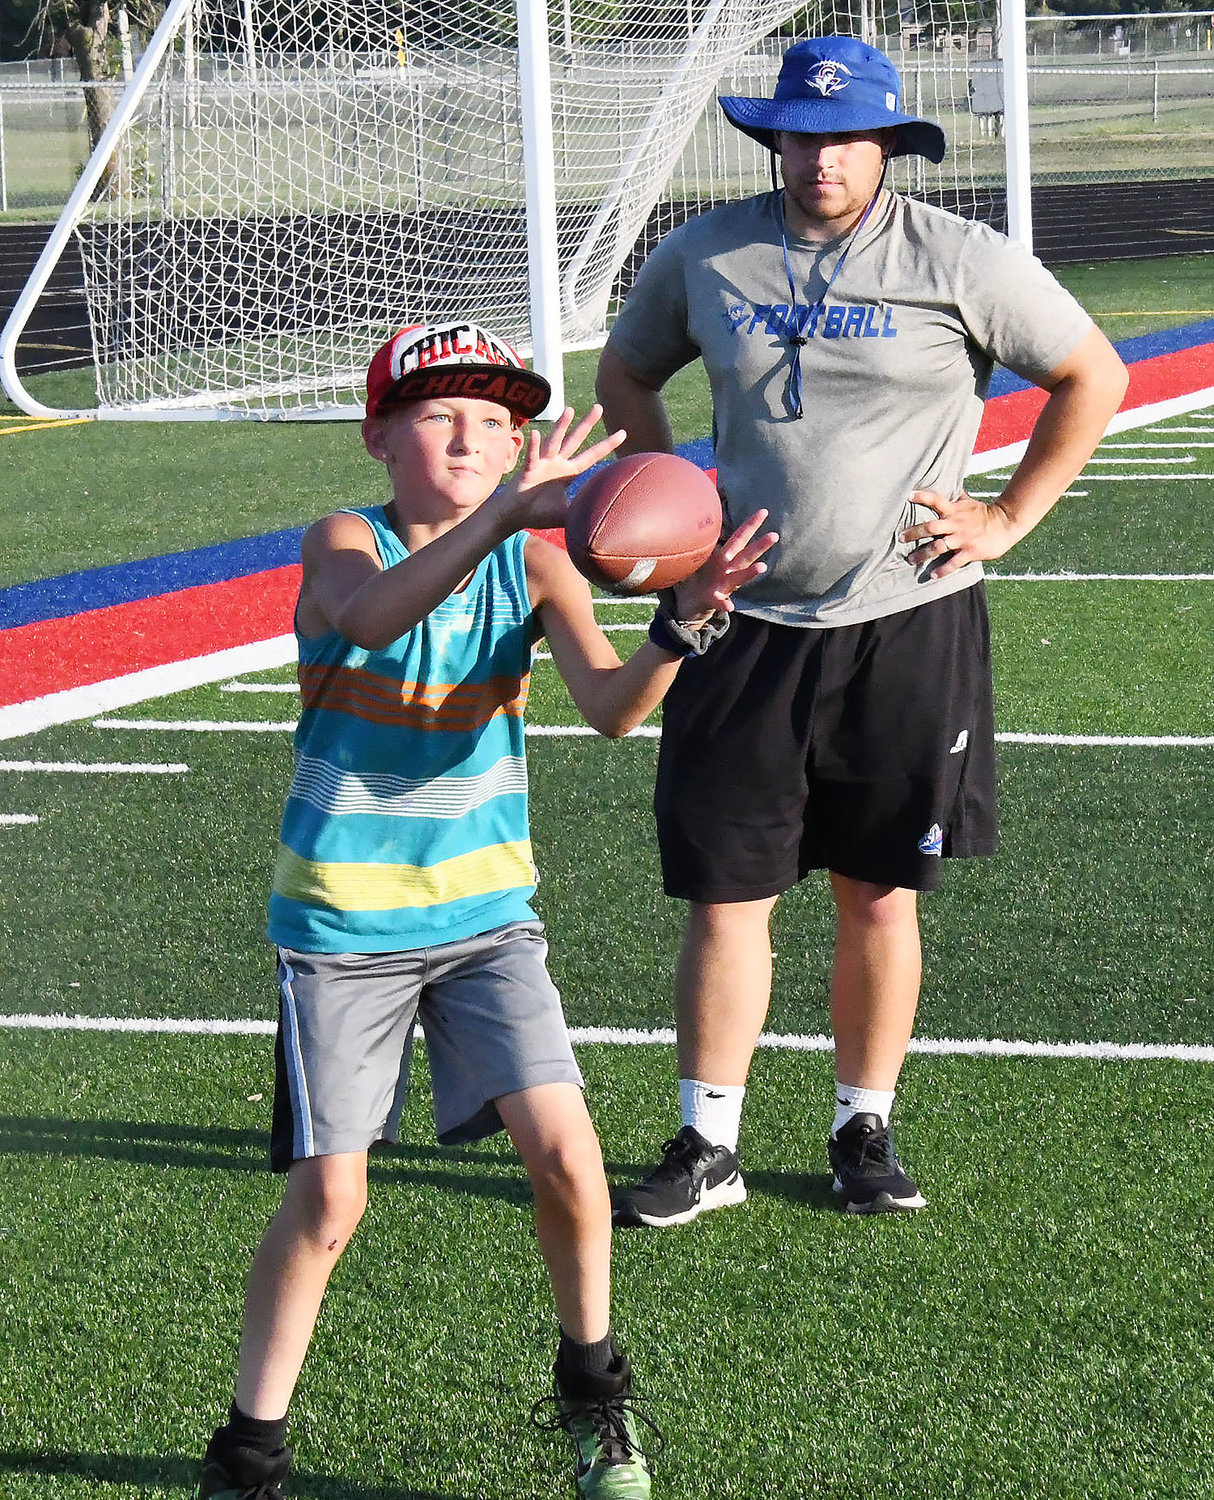 Under the watchful eye of the Moberly High School coaching staff, a wide receiver catches a pass.